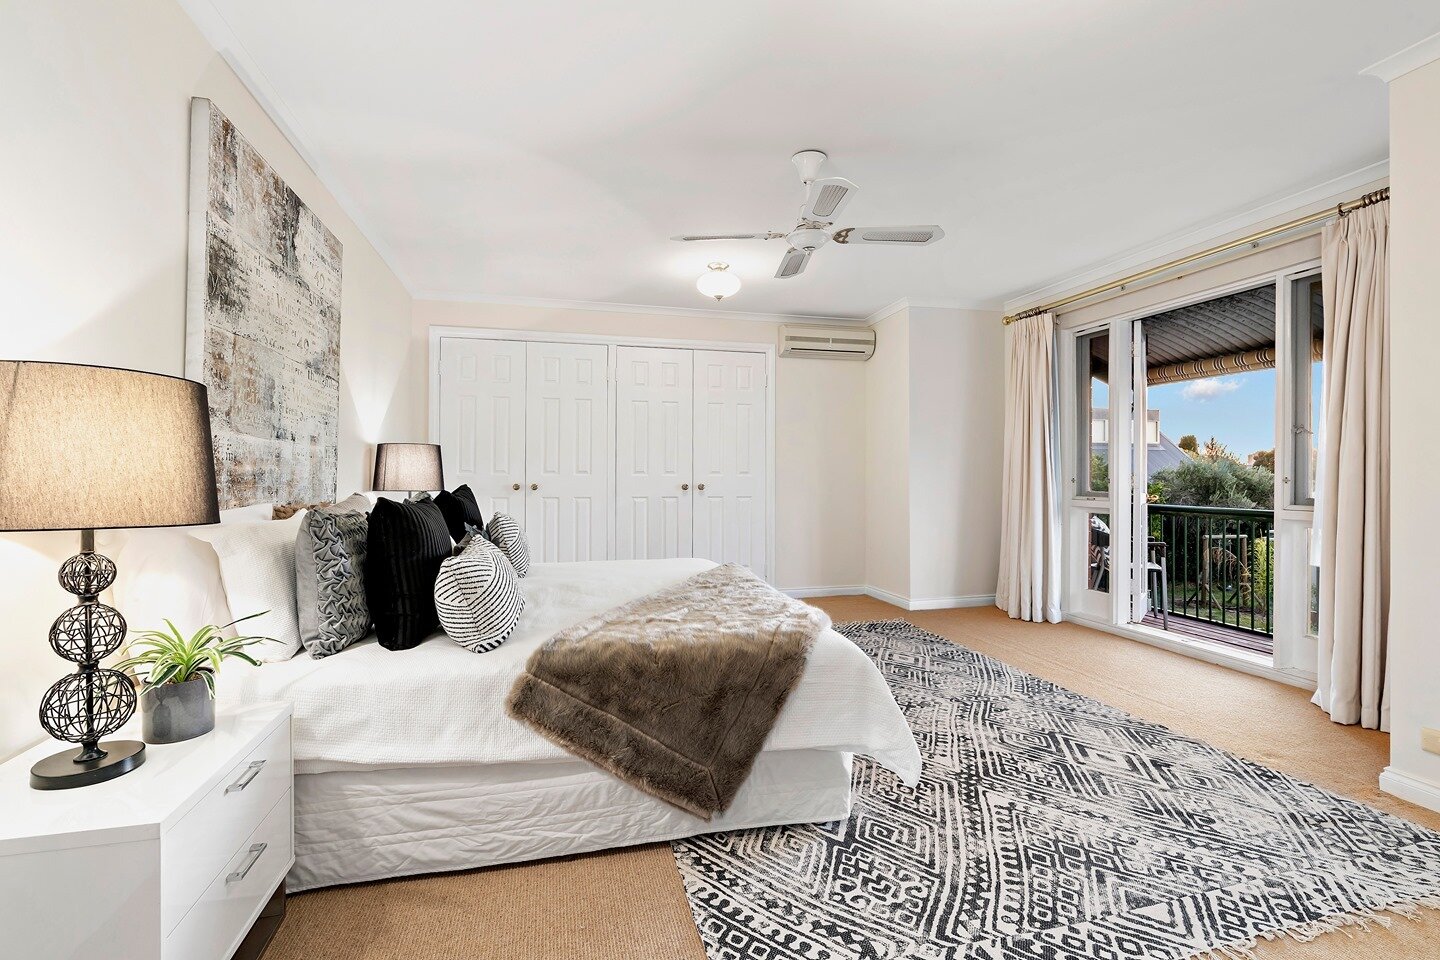 [Real Estate] The bedrooms are often overshadowed by other rooms in displaying a home photographically but this one was a little different.⁠
⁠
@diakritanz @bellepropertynorwood⁠
⁠
#realestate #adelaiderealestate #adelaiderealestatephotographer #homes